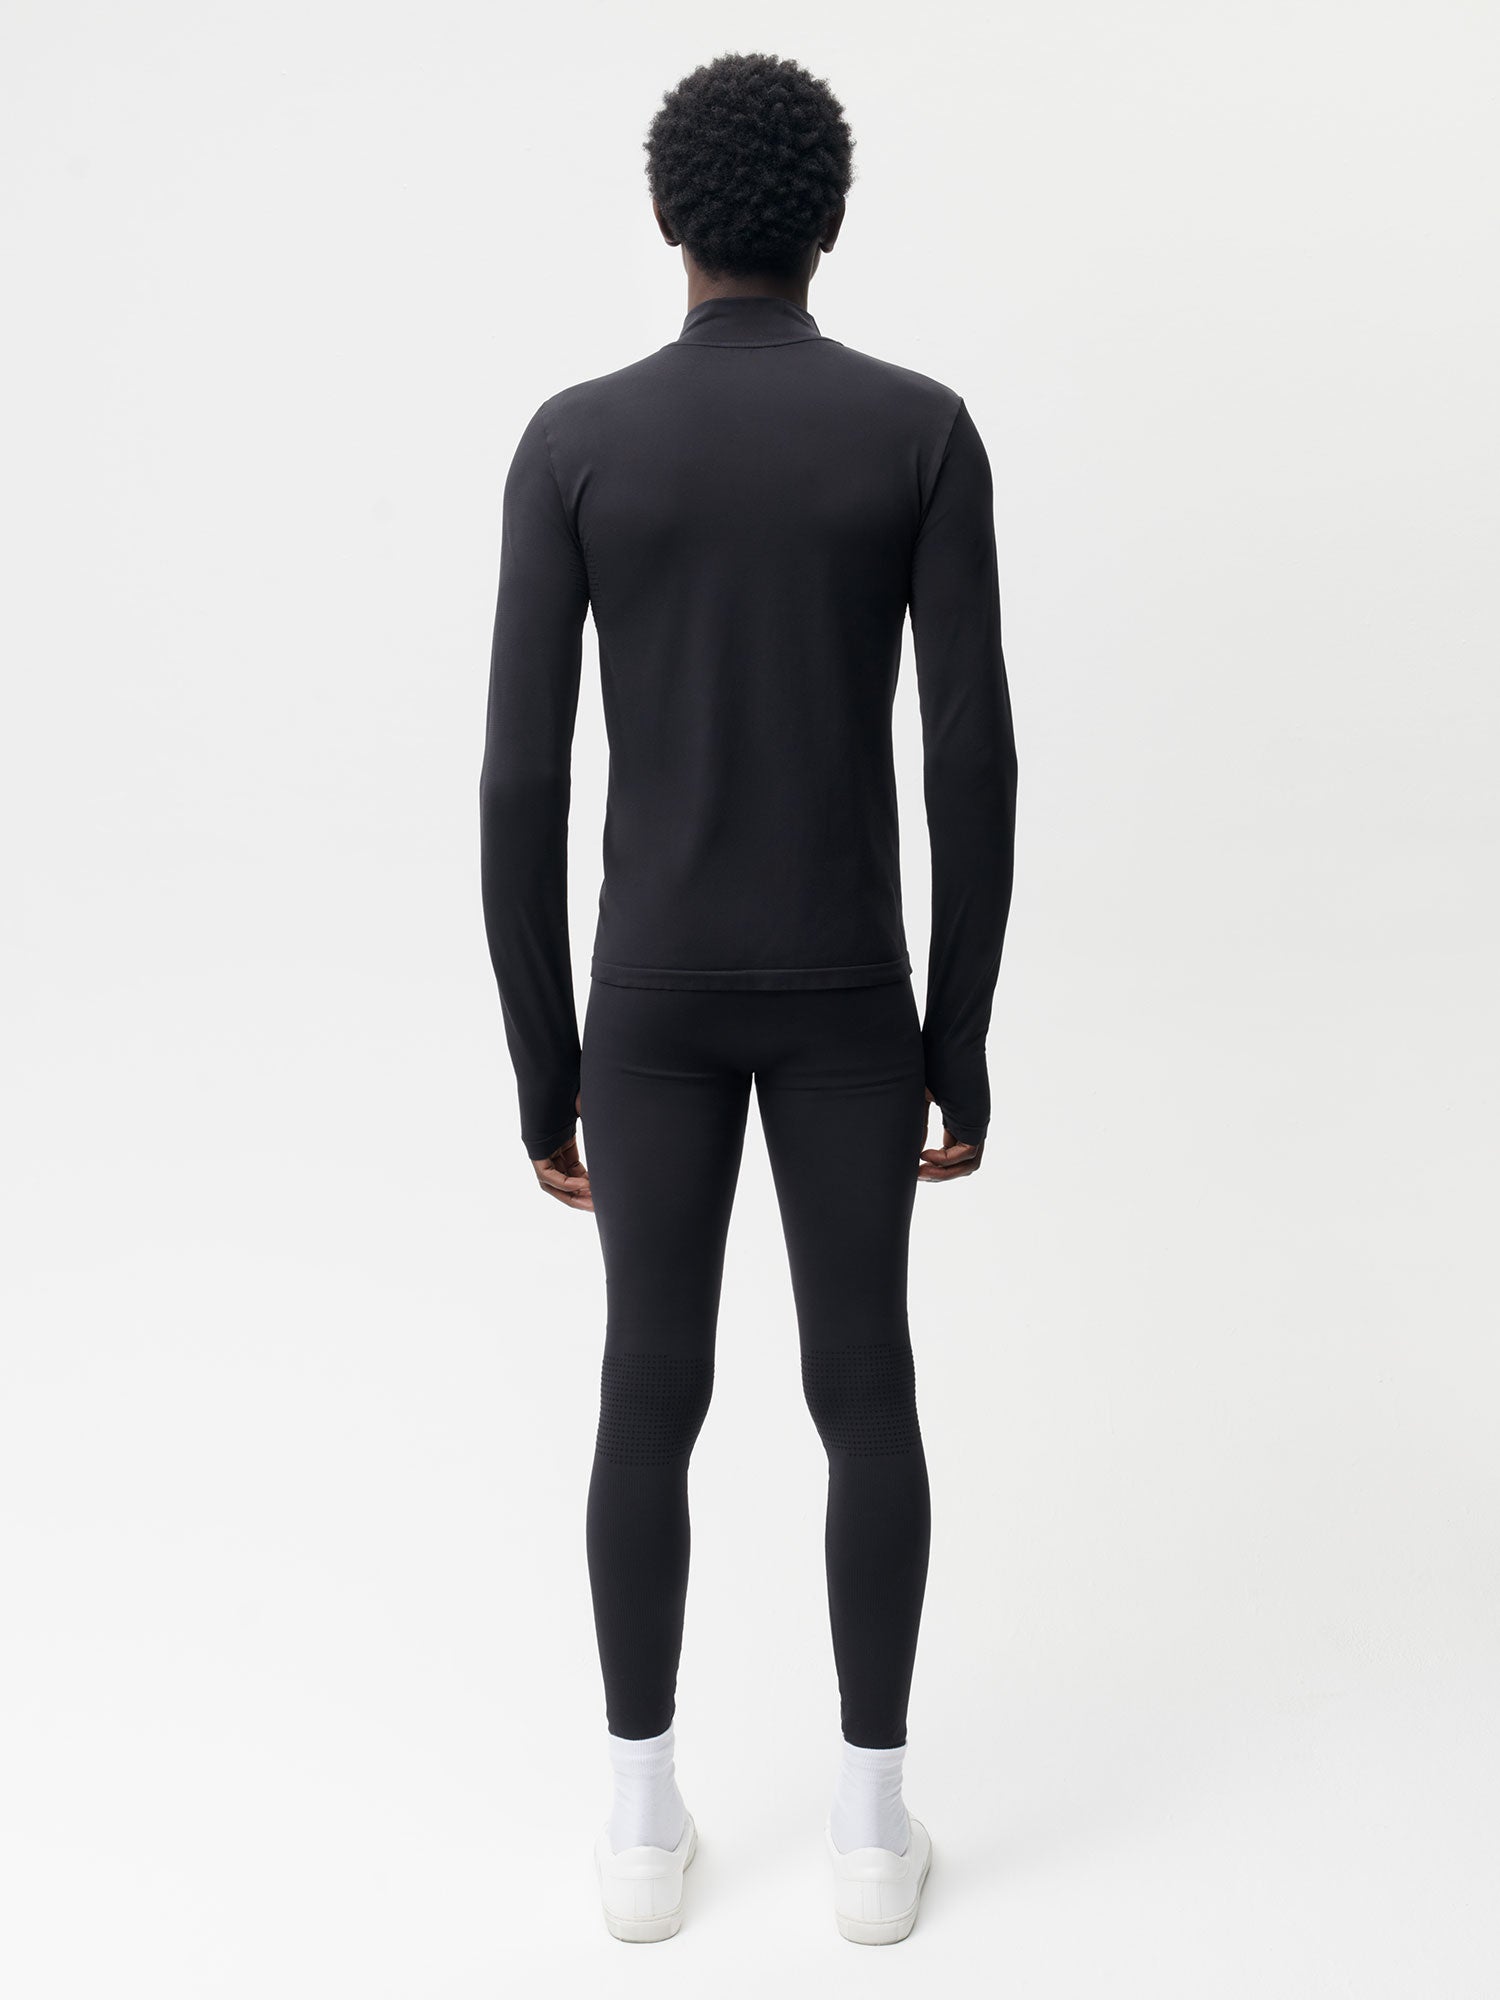 Activewear-3.1-Seamless-Tights-Black-Male-2